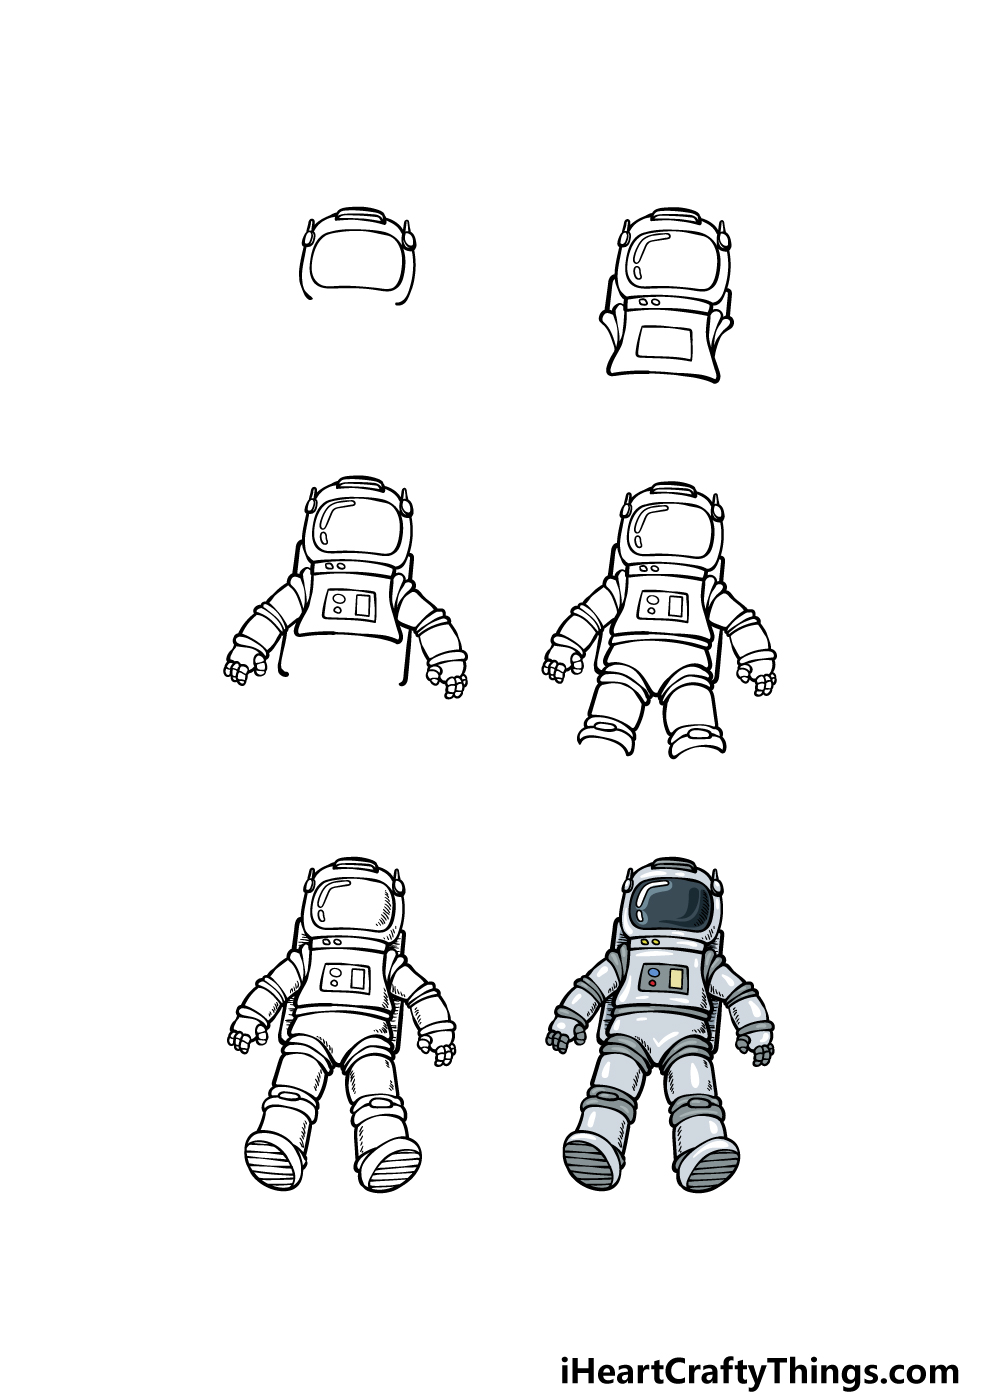 how to draw an Astronaut in 6 steps